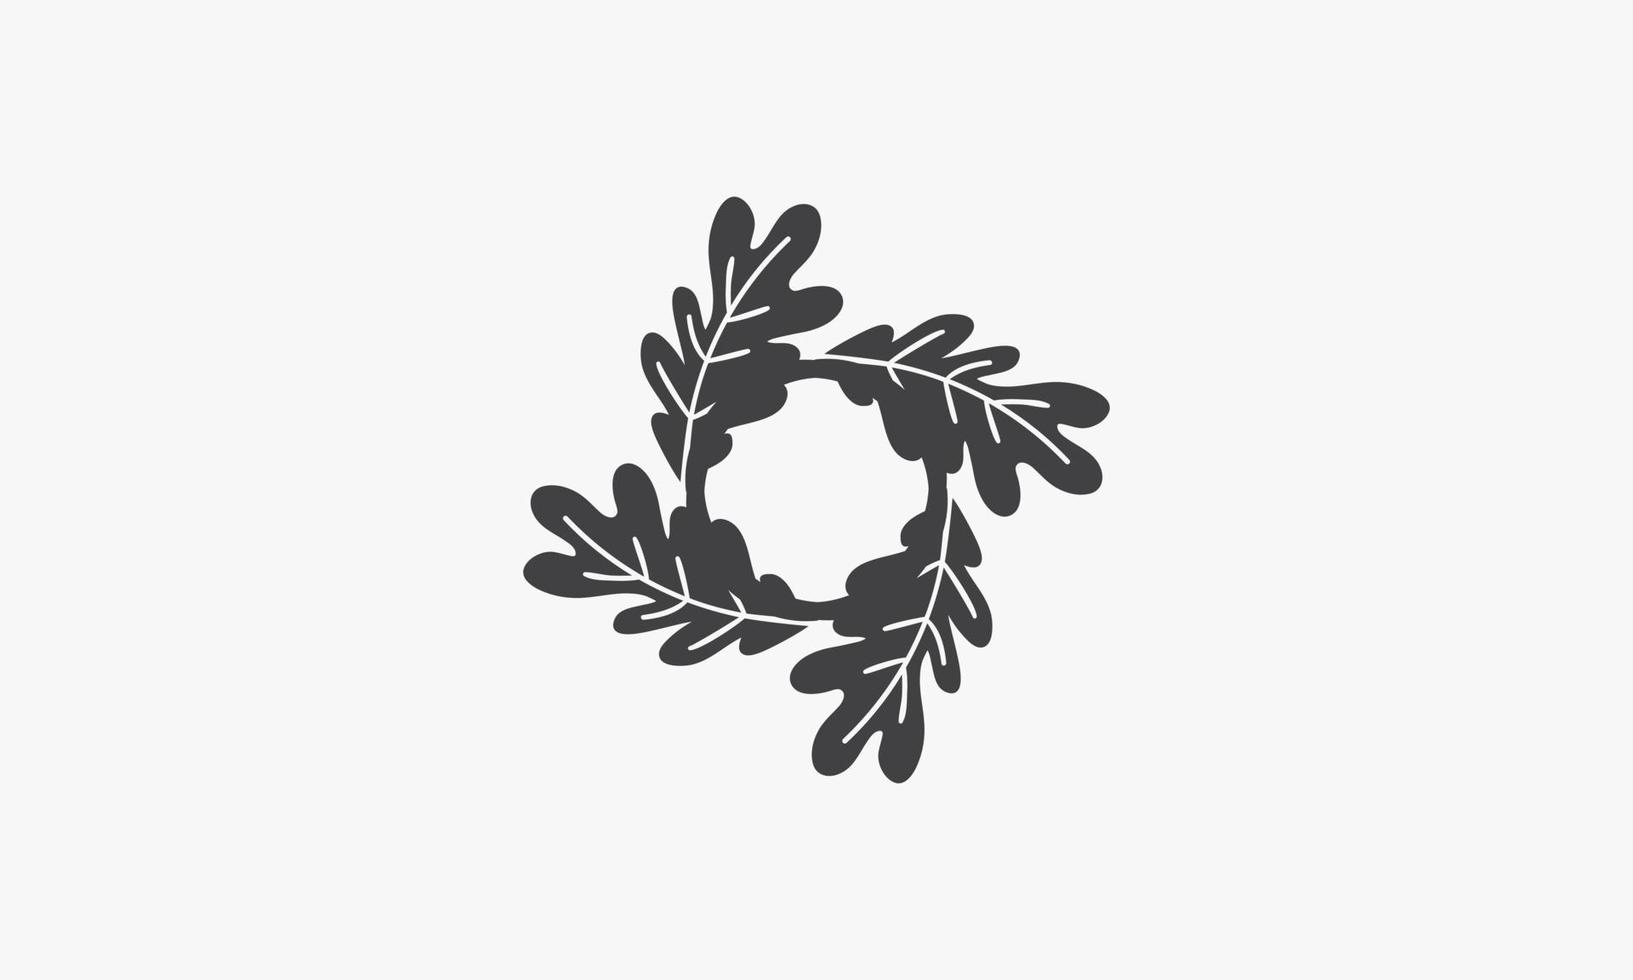 spin oak leaf icon logo concept on white background. vector